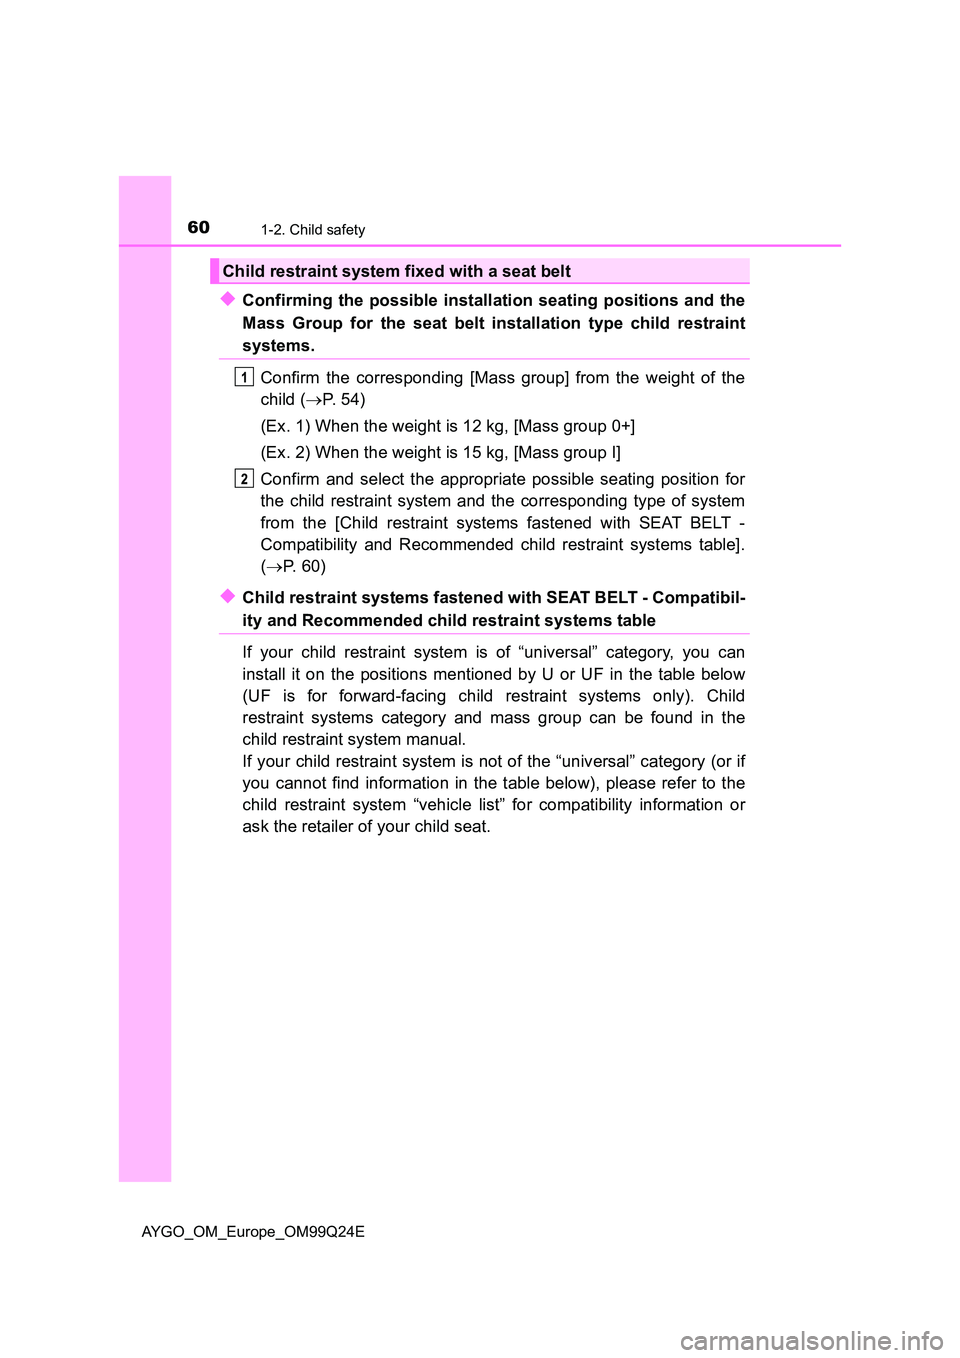 TOYOTA AYGO 2017  Owners Manual (in English) 601-2. Child safety
AYGO_OM_Europe_OM99Q24E
◆Confirming the possible installation seating positions and the 
Mass Group for the seat belt installation type child restraint
systems. 
Confirm the corr